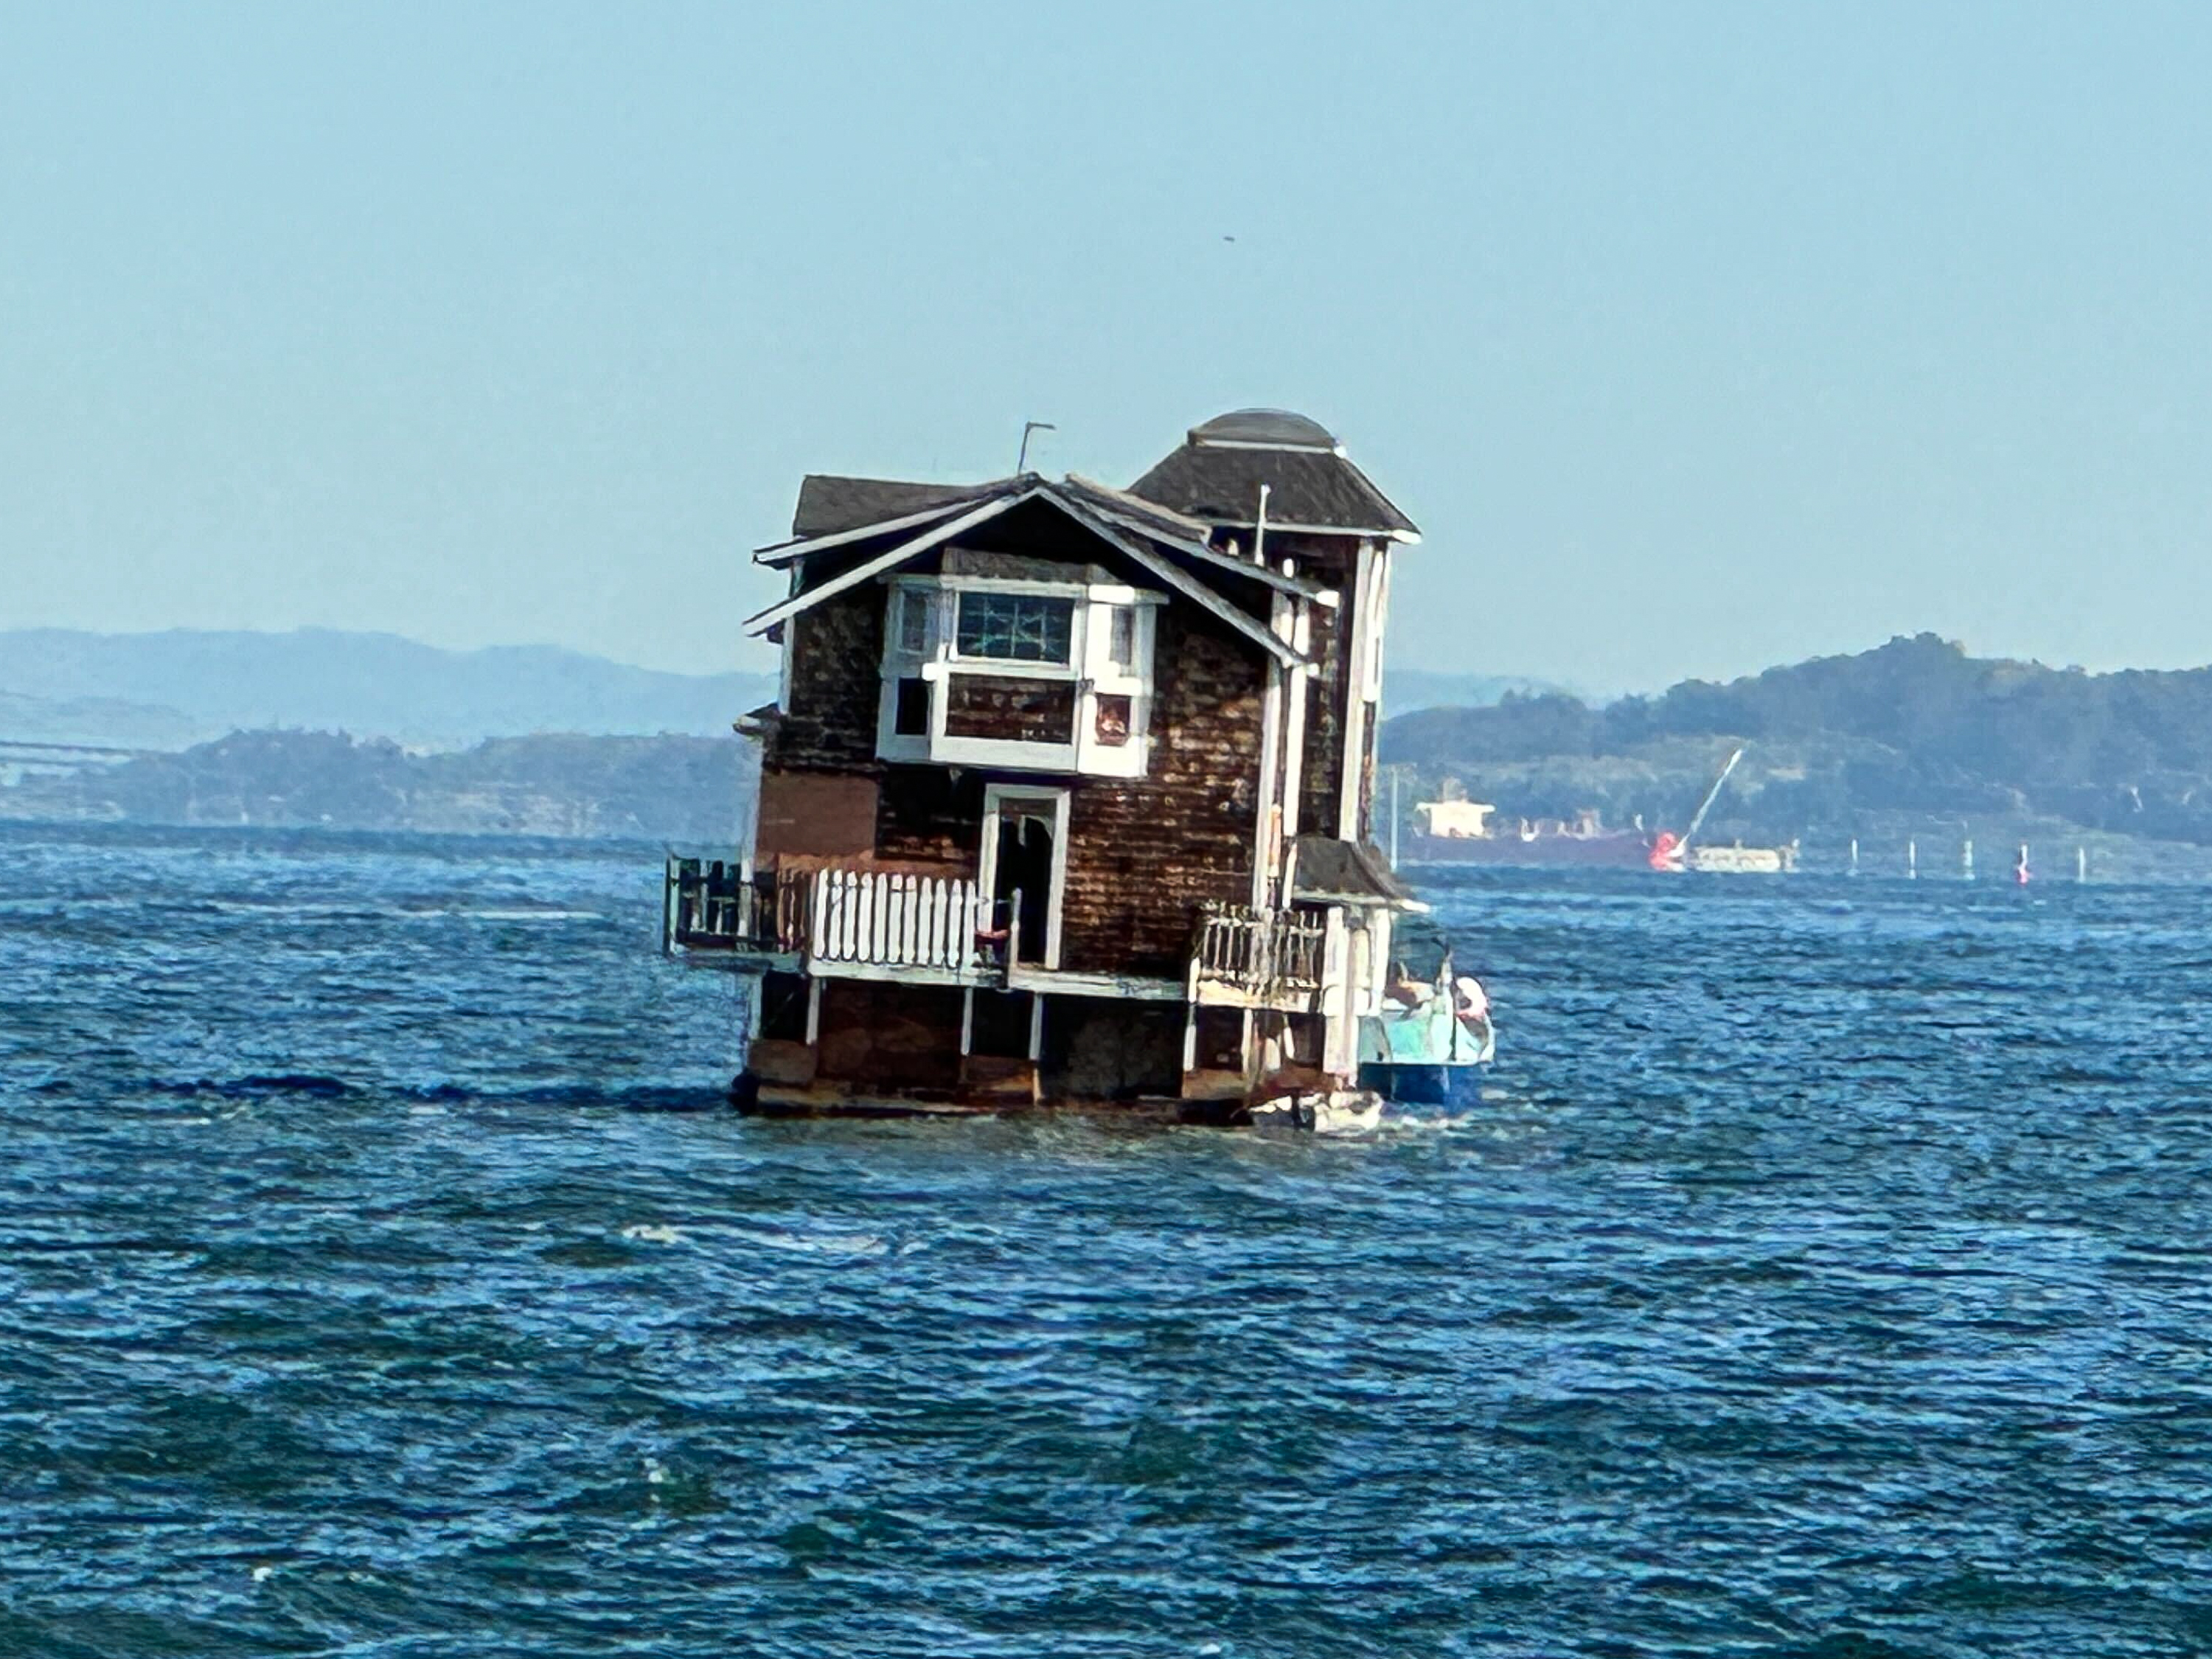 A houseboat in the bay.